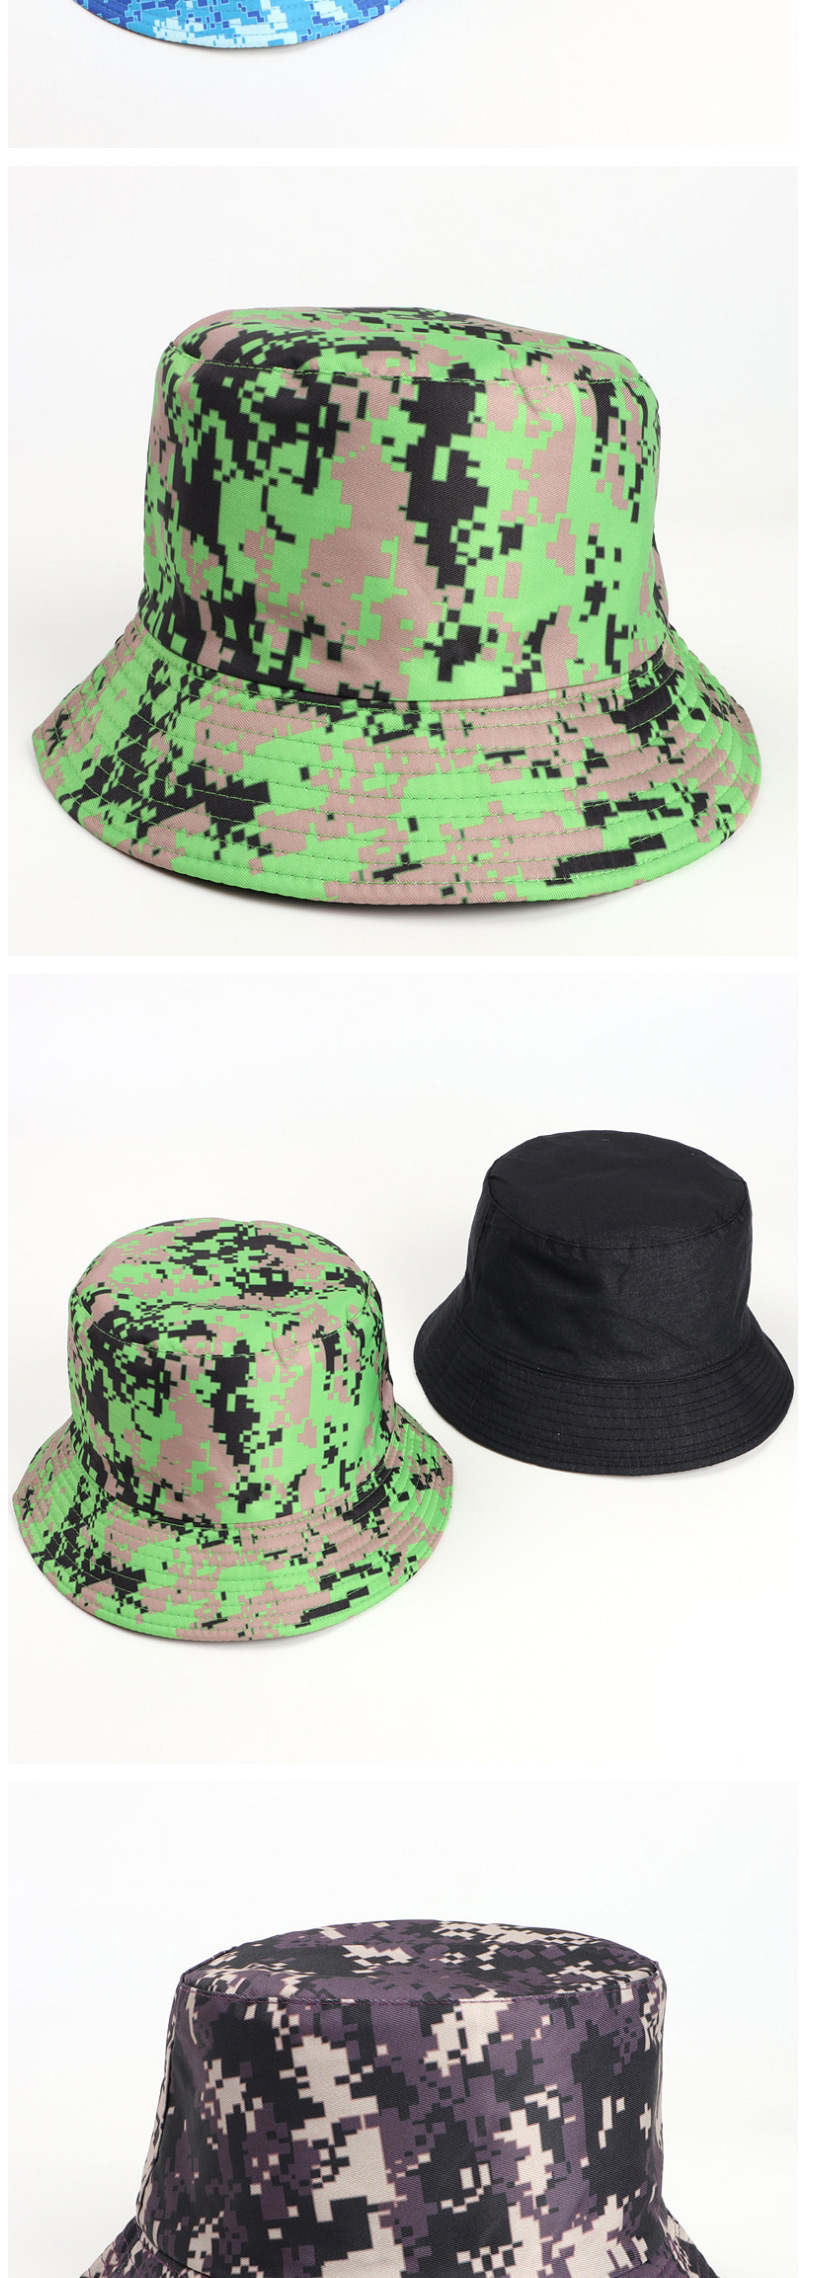 Fashion Sky Blue Printed Double-sided Multicolor Camouflage Fisherman Hat,Sun Hats